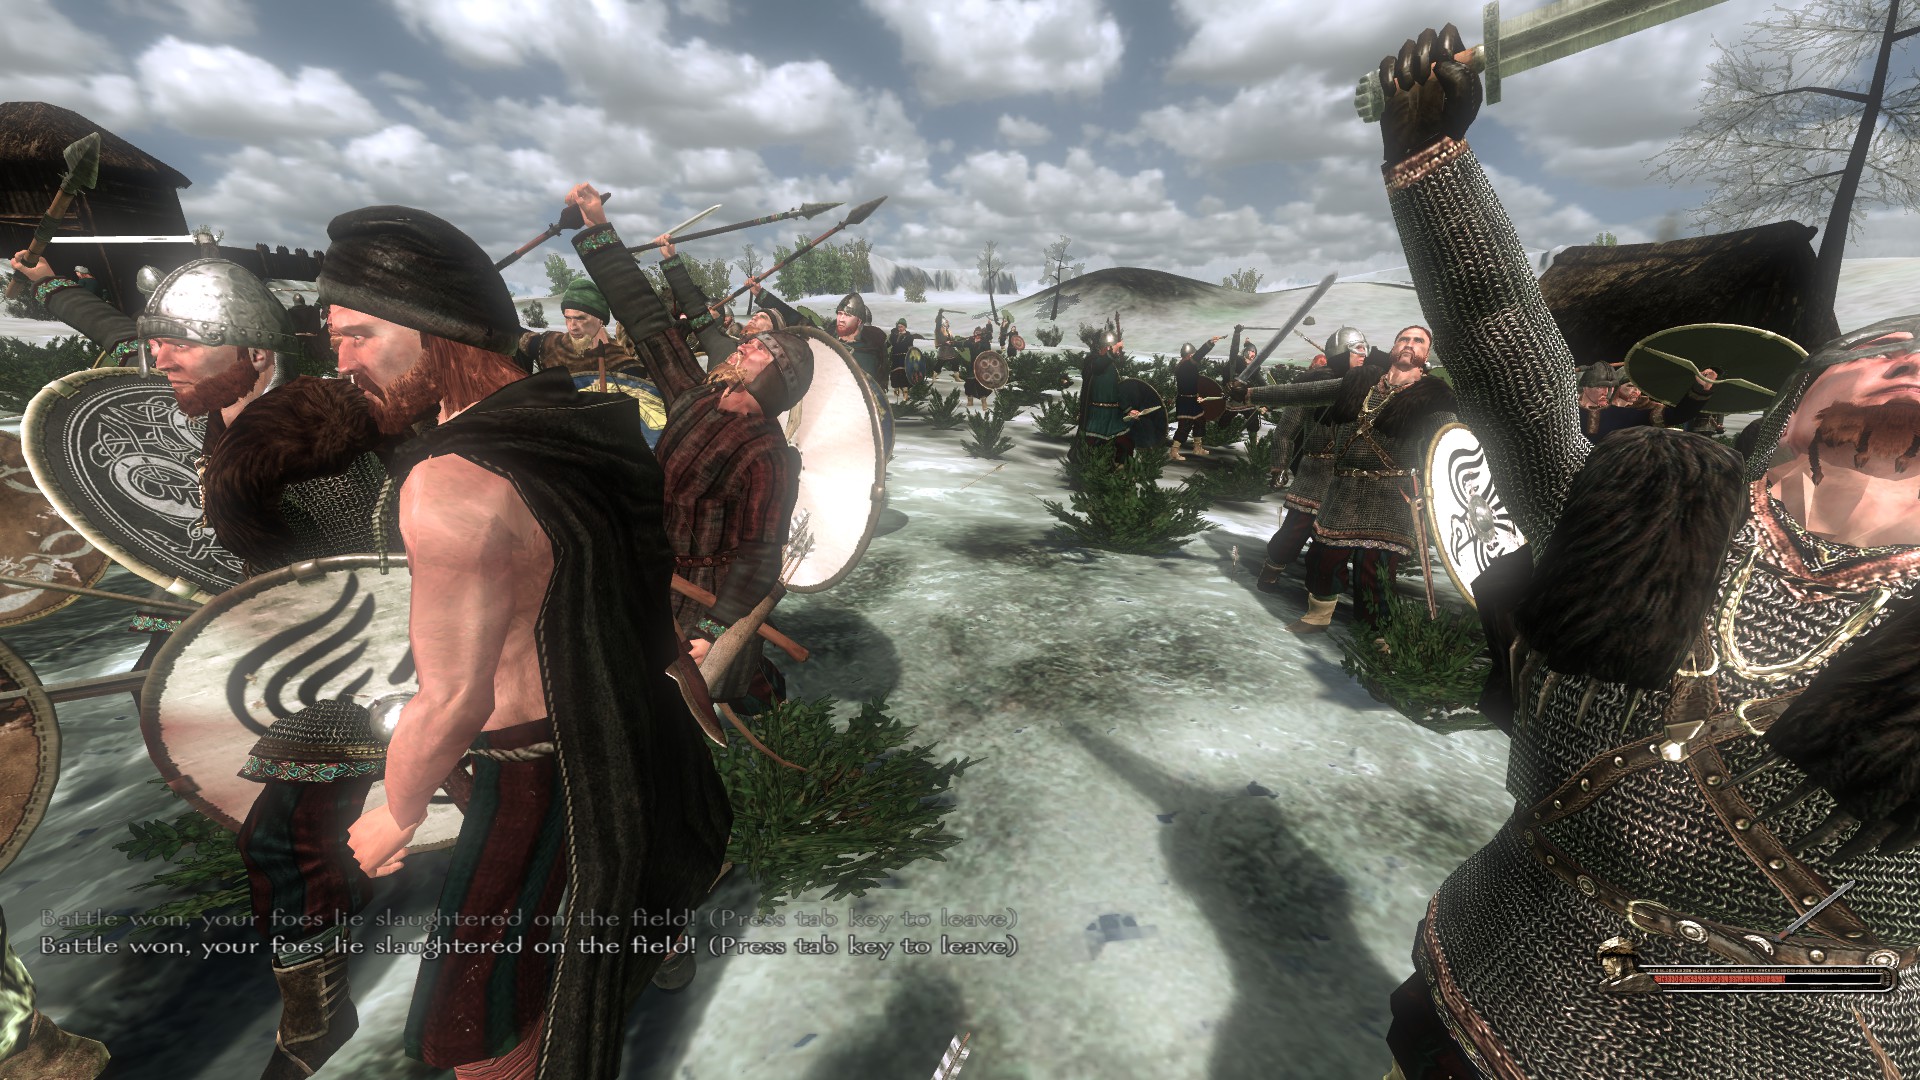 mount and blade viking conquest mods